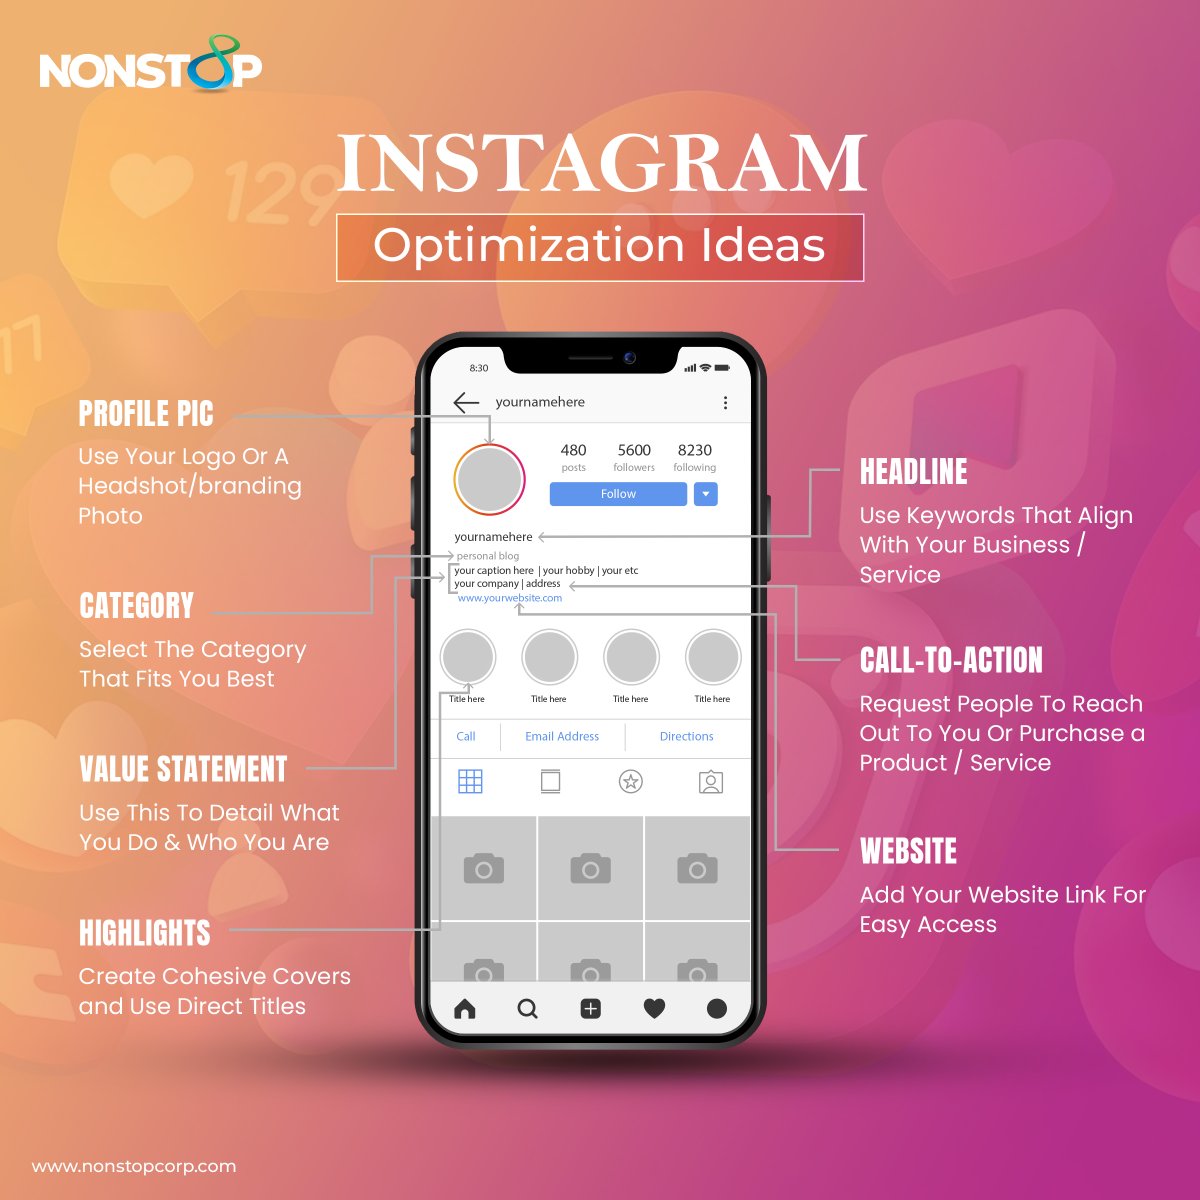 Transform your Instagram bio into a captivating masterpiece!
Here are the few points :-
1.  Profile Photo
2.  Expert Statement
3.  Expert Title
4.  Call to Action
5.  Optimize with Keywords
#instagrambio #instagramtips #instagram #socialmediamarketing #contentcreator